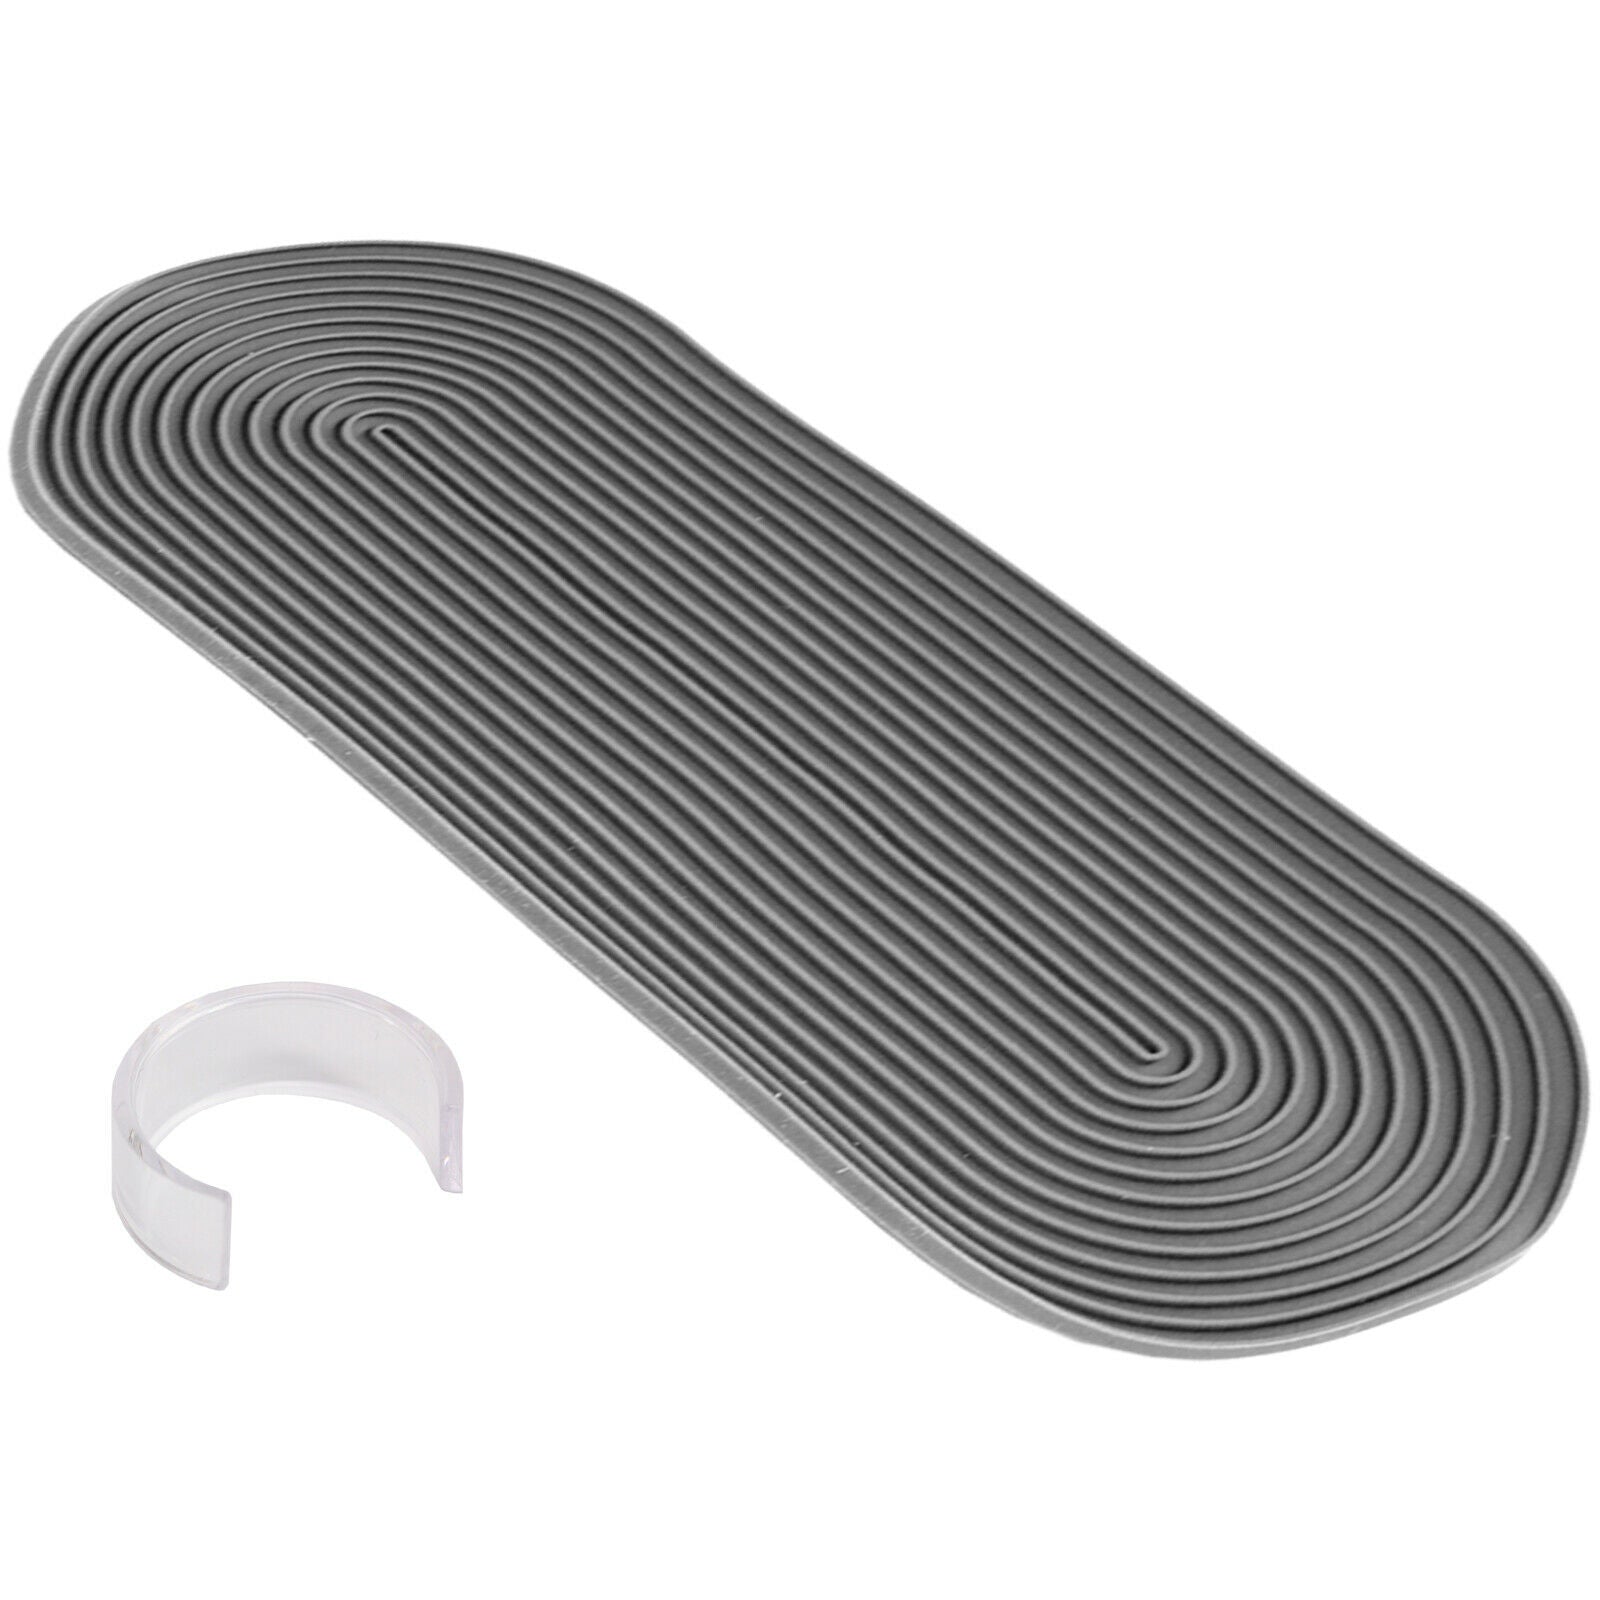 DYSON Supersonic™ Hair Dryer Non Slip Heat Mat Safety Pad with Clip 25 x 10cm